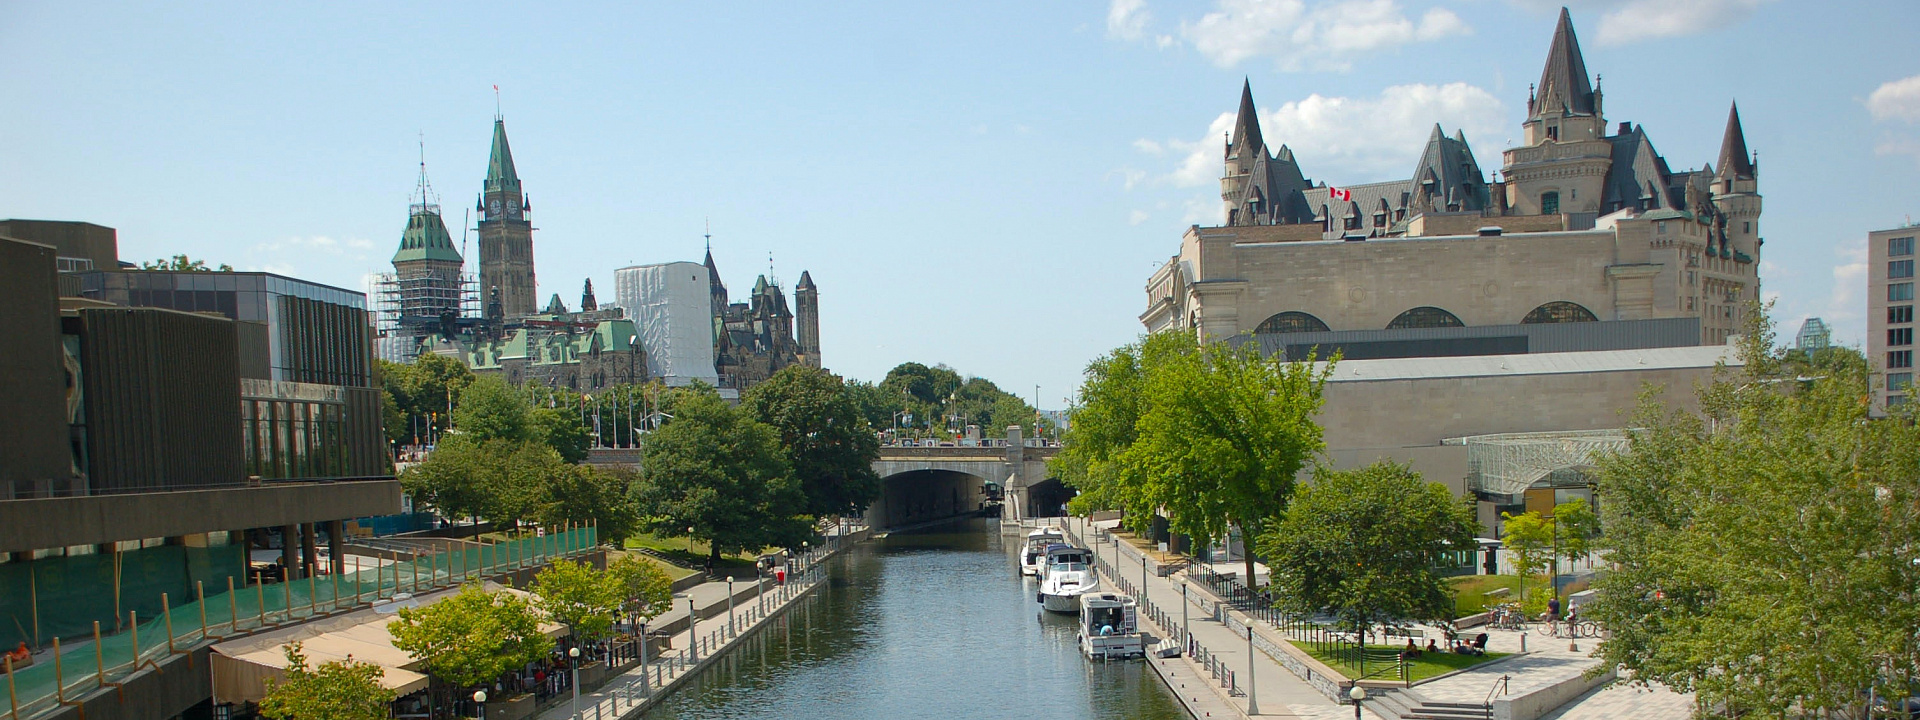 landscape photo of the Rideau Canal in Ottawa